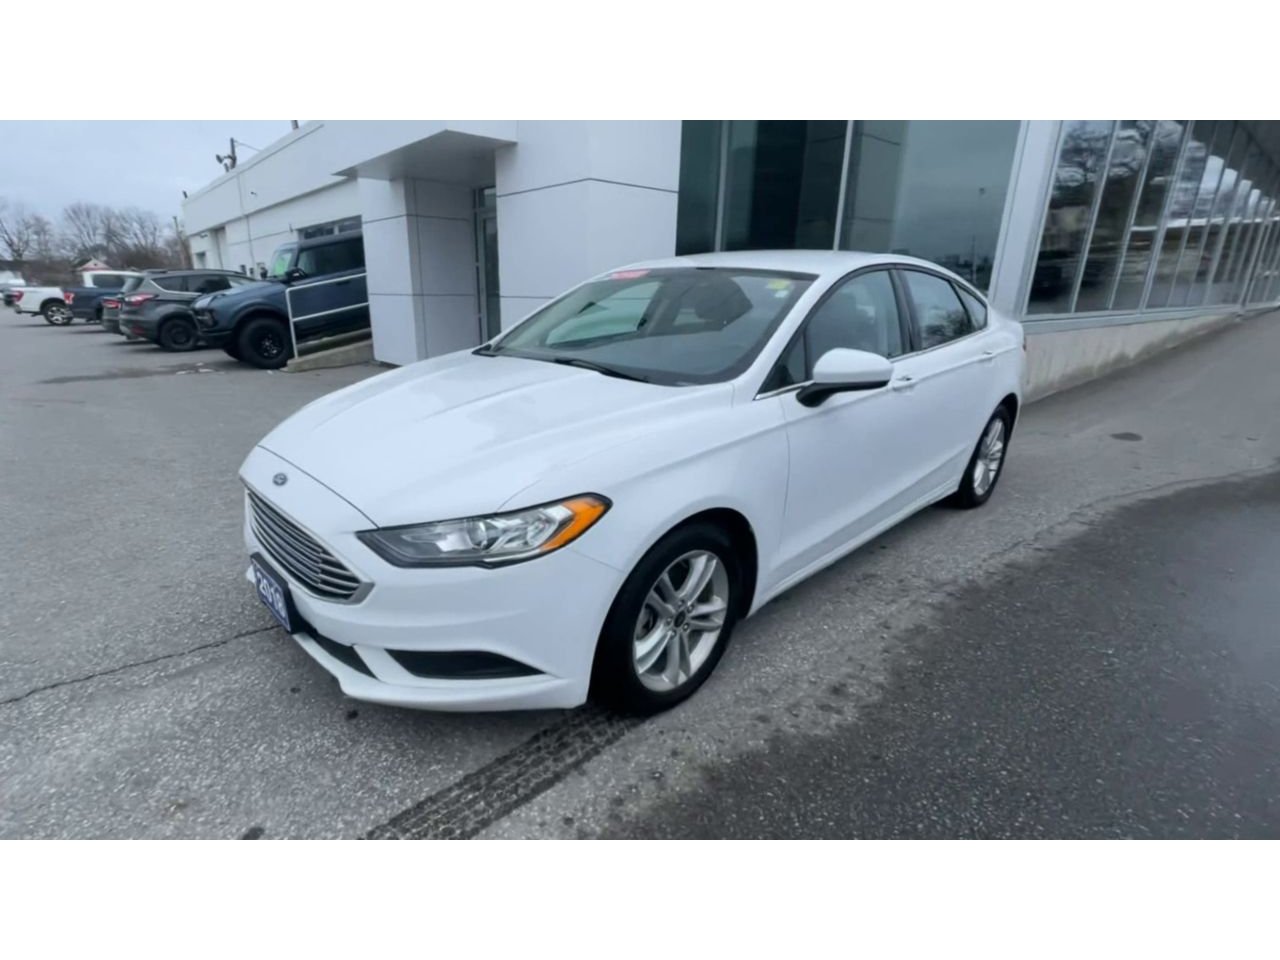 2018 Ford Fusion - P21087 Full Image 4